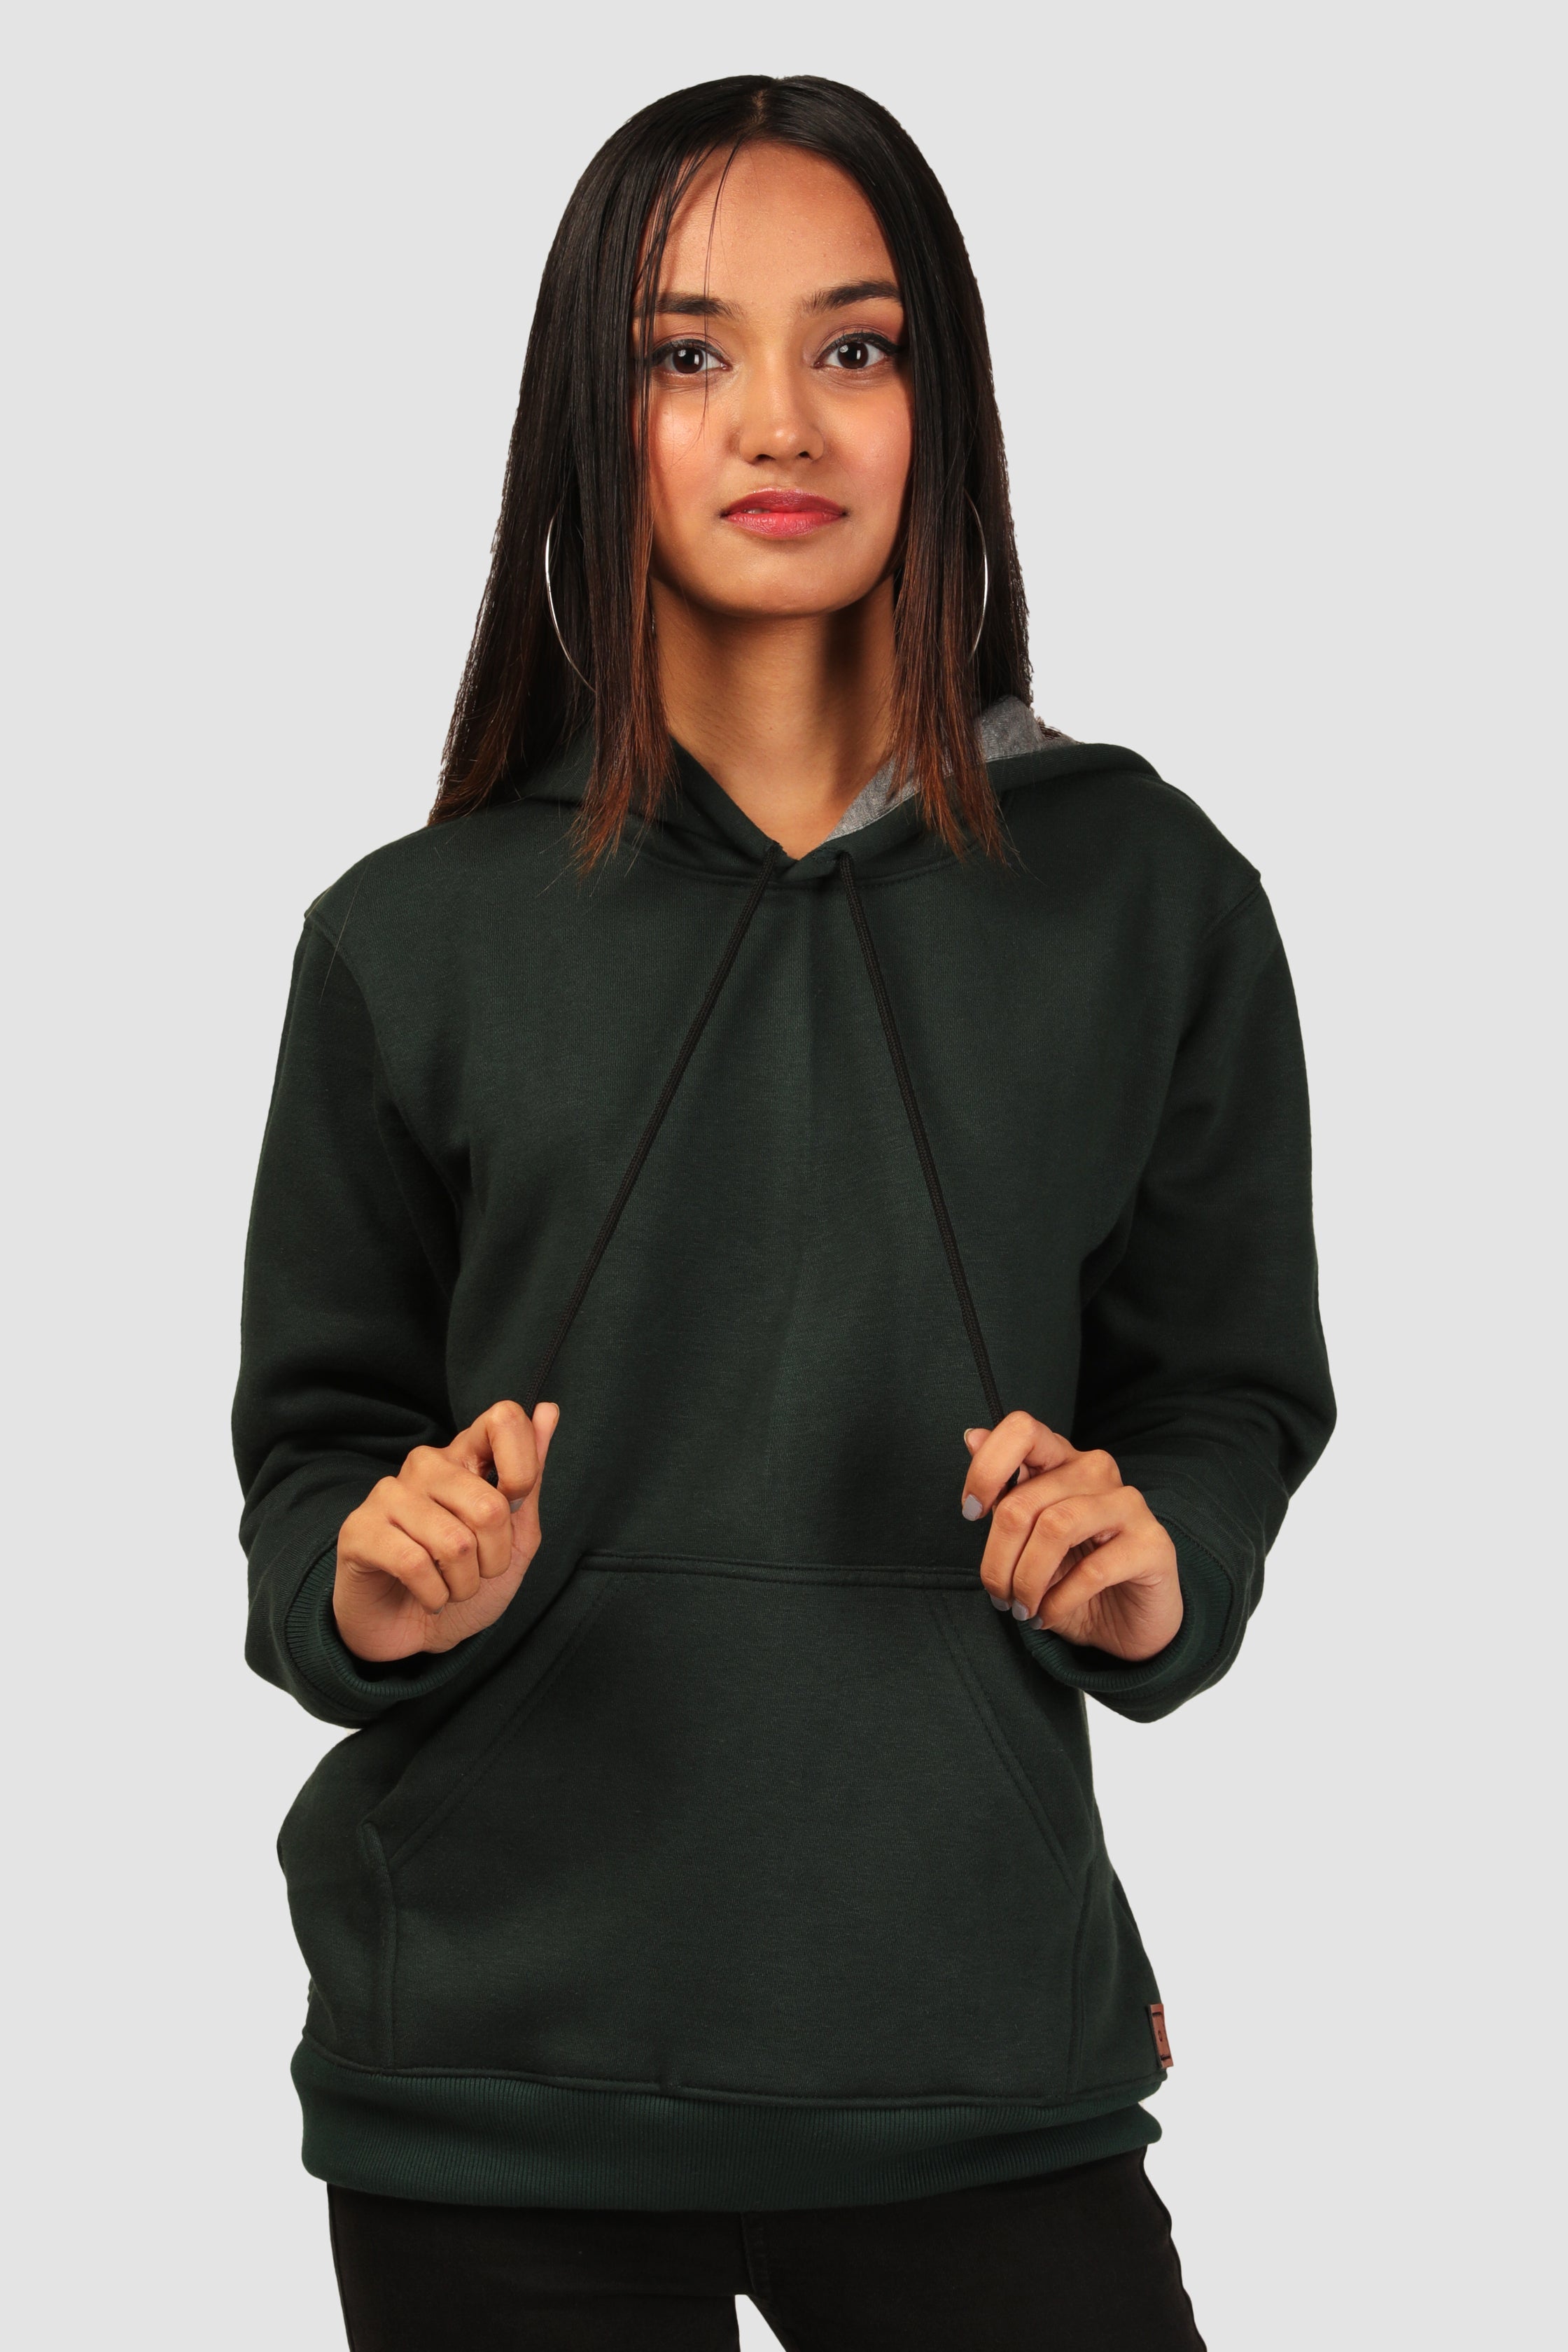 WALLY - GREEN VELOUR SOLID WOMENS HOODIE